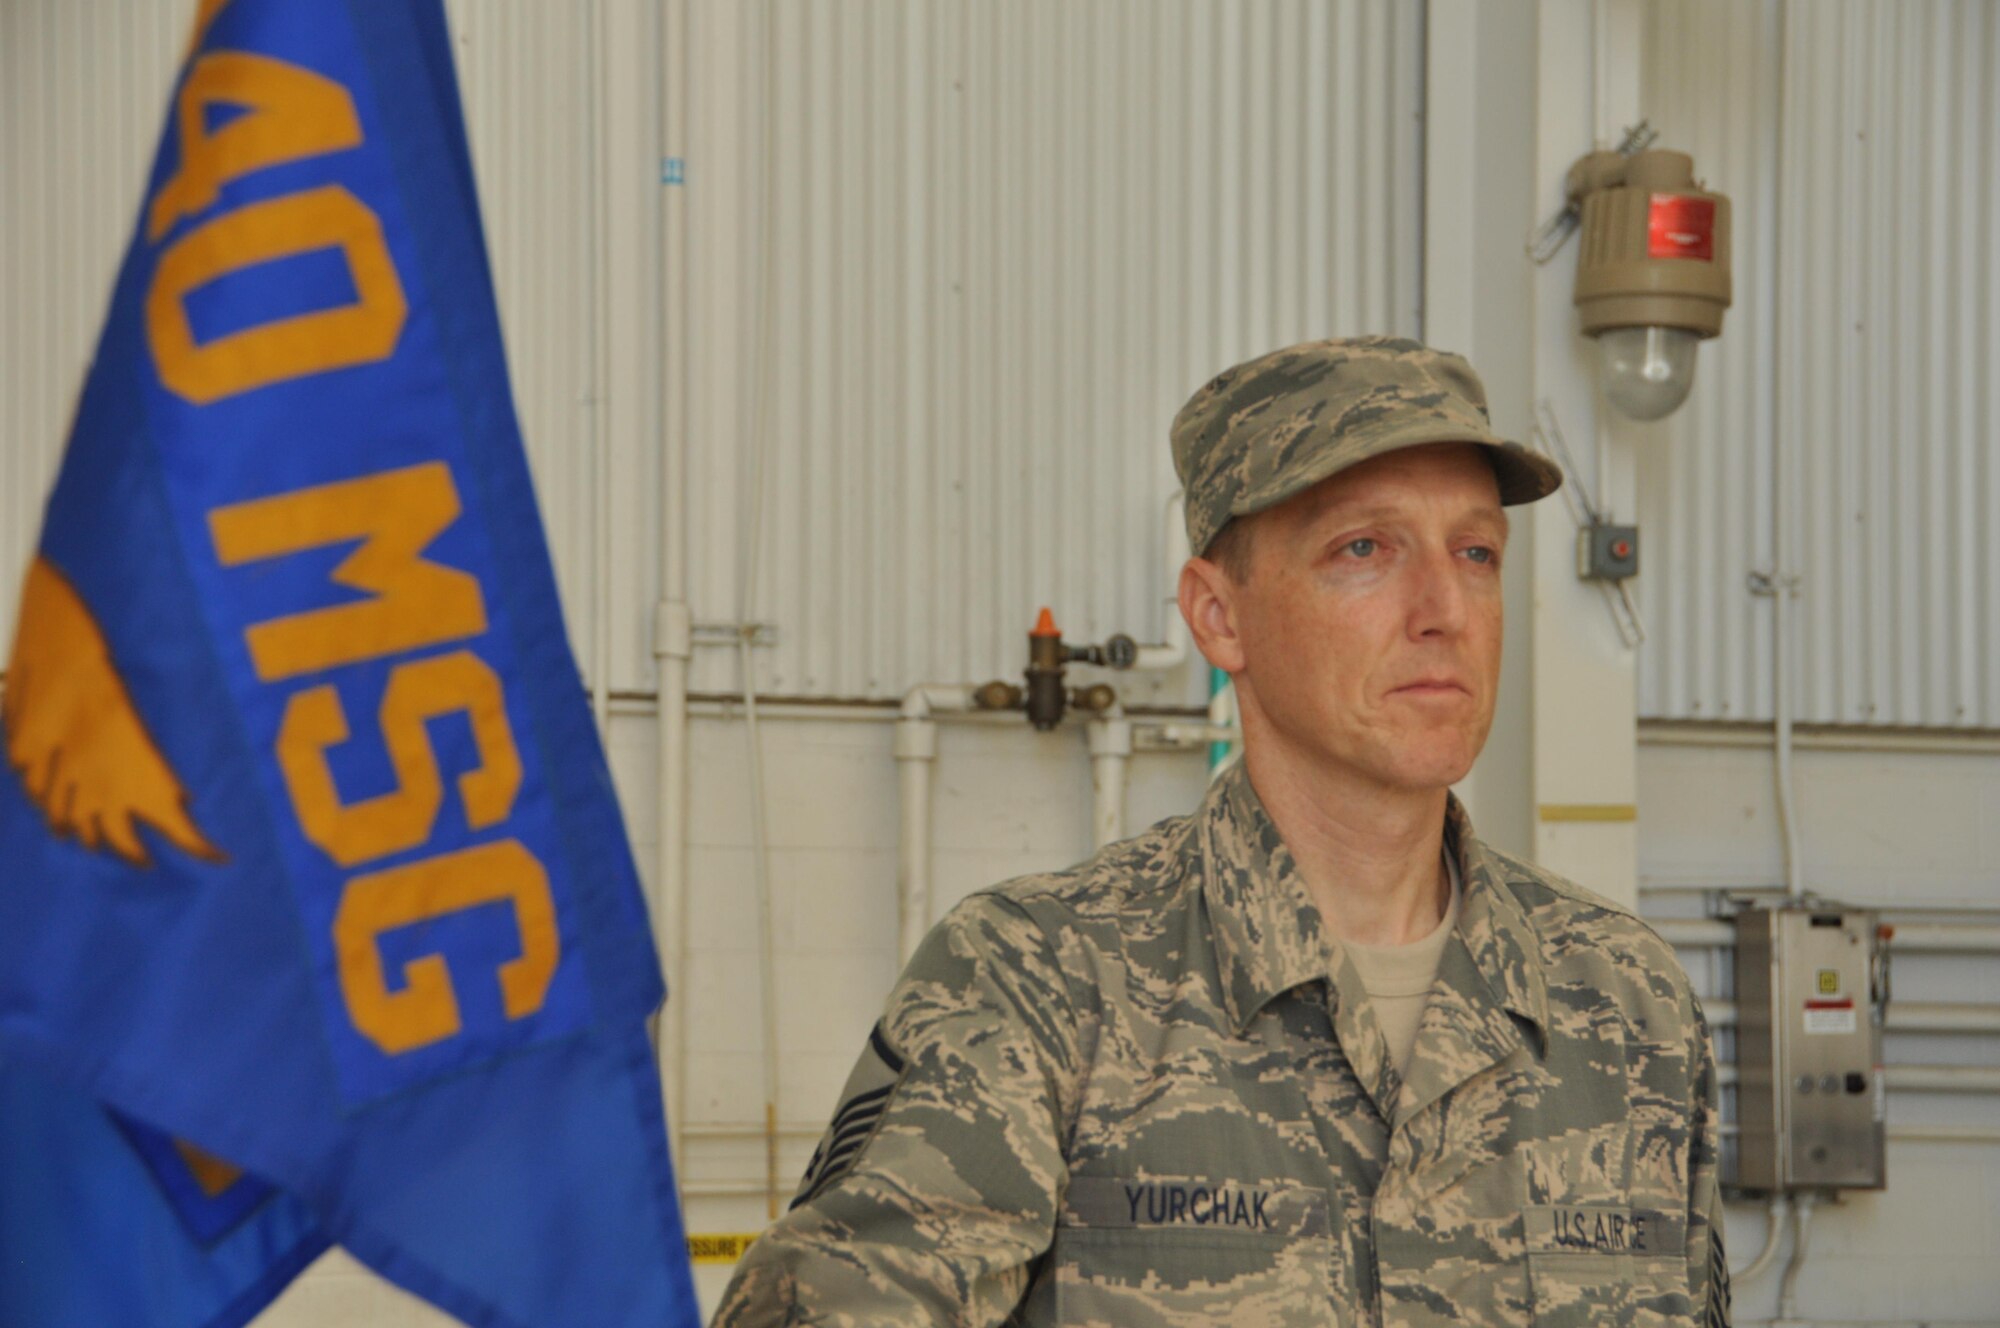 Pope Army Airfield, N.C.- Master Sgt. Thomas Yurchak stands proudly holding the 440th Logistics Readiness Squadron guidon a final time before it is retired during the inactivation ceremony of the 440th Airlift Wing on September 18, 2016. The third oldest unit in the Air Force, the 440th AW's first operational drop was in Normandy, France on D-Day. From 2007 to 2016, while based at Fort Bragg, the unit provided air support for more than 102,000 paratroopers, flew more than 27,000 hours, and supported Operations CORONET OAK, IRAQI FEREDOM, NEW DAWN, ENDURING FREEDOM, UNIFIED RESPONSE, and INHERENT RESOLVE. (US Air Force photo by Allison Janssen) 
